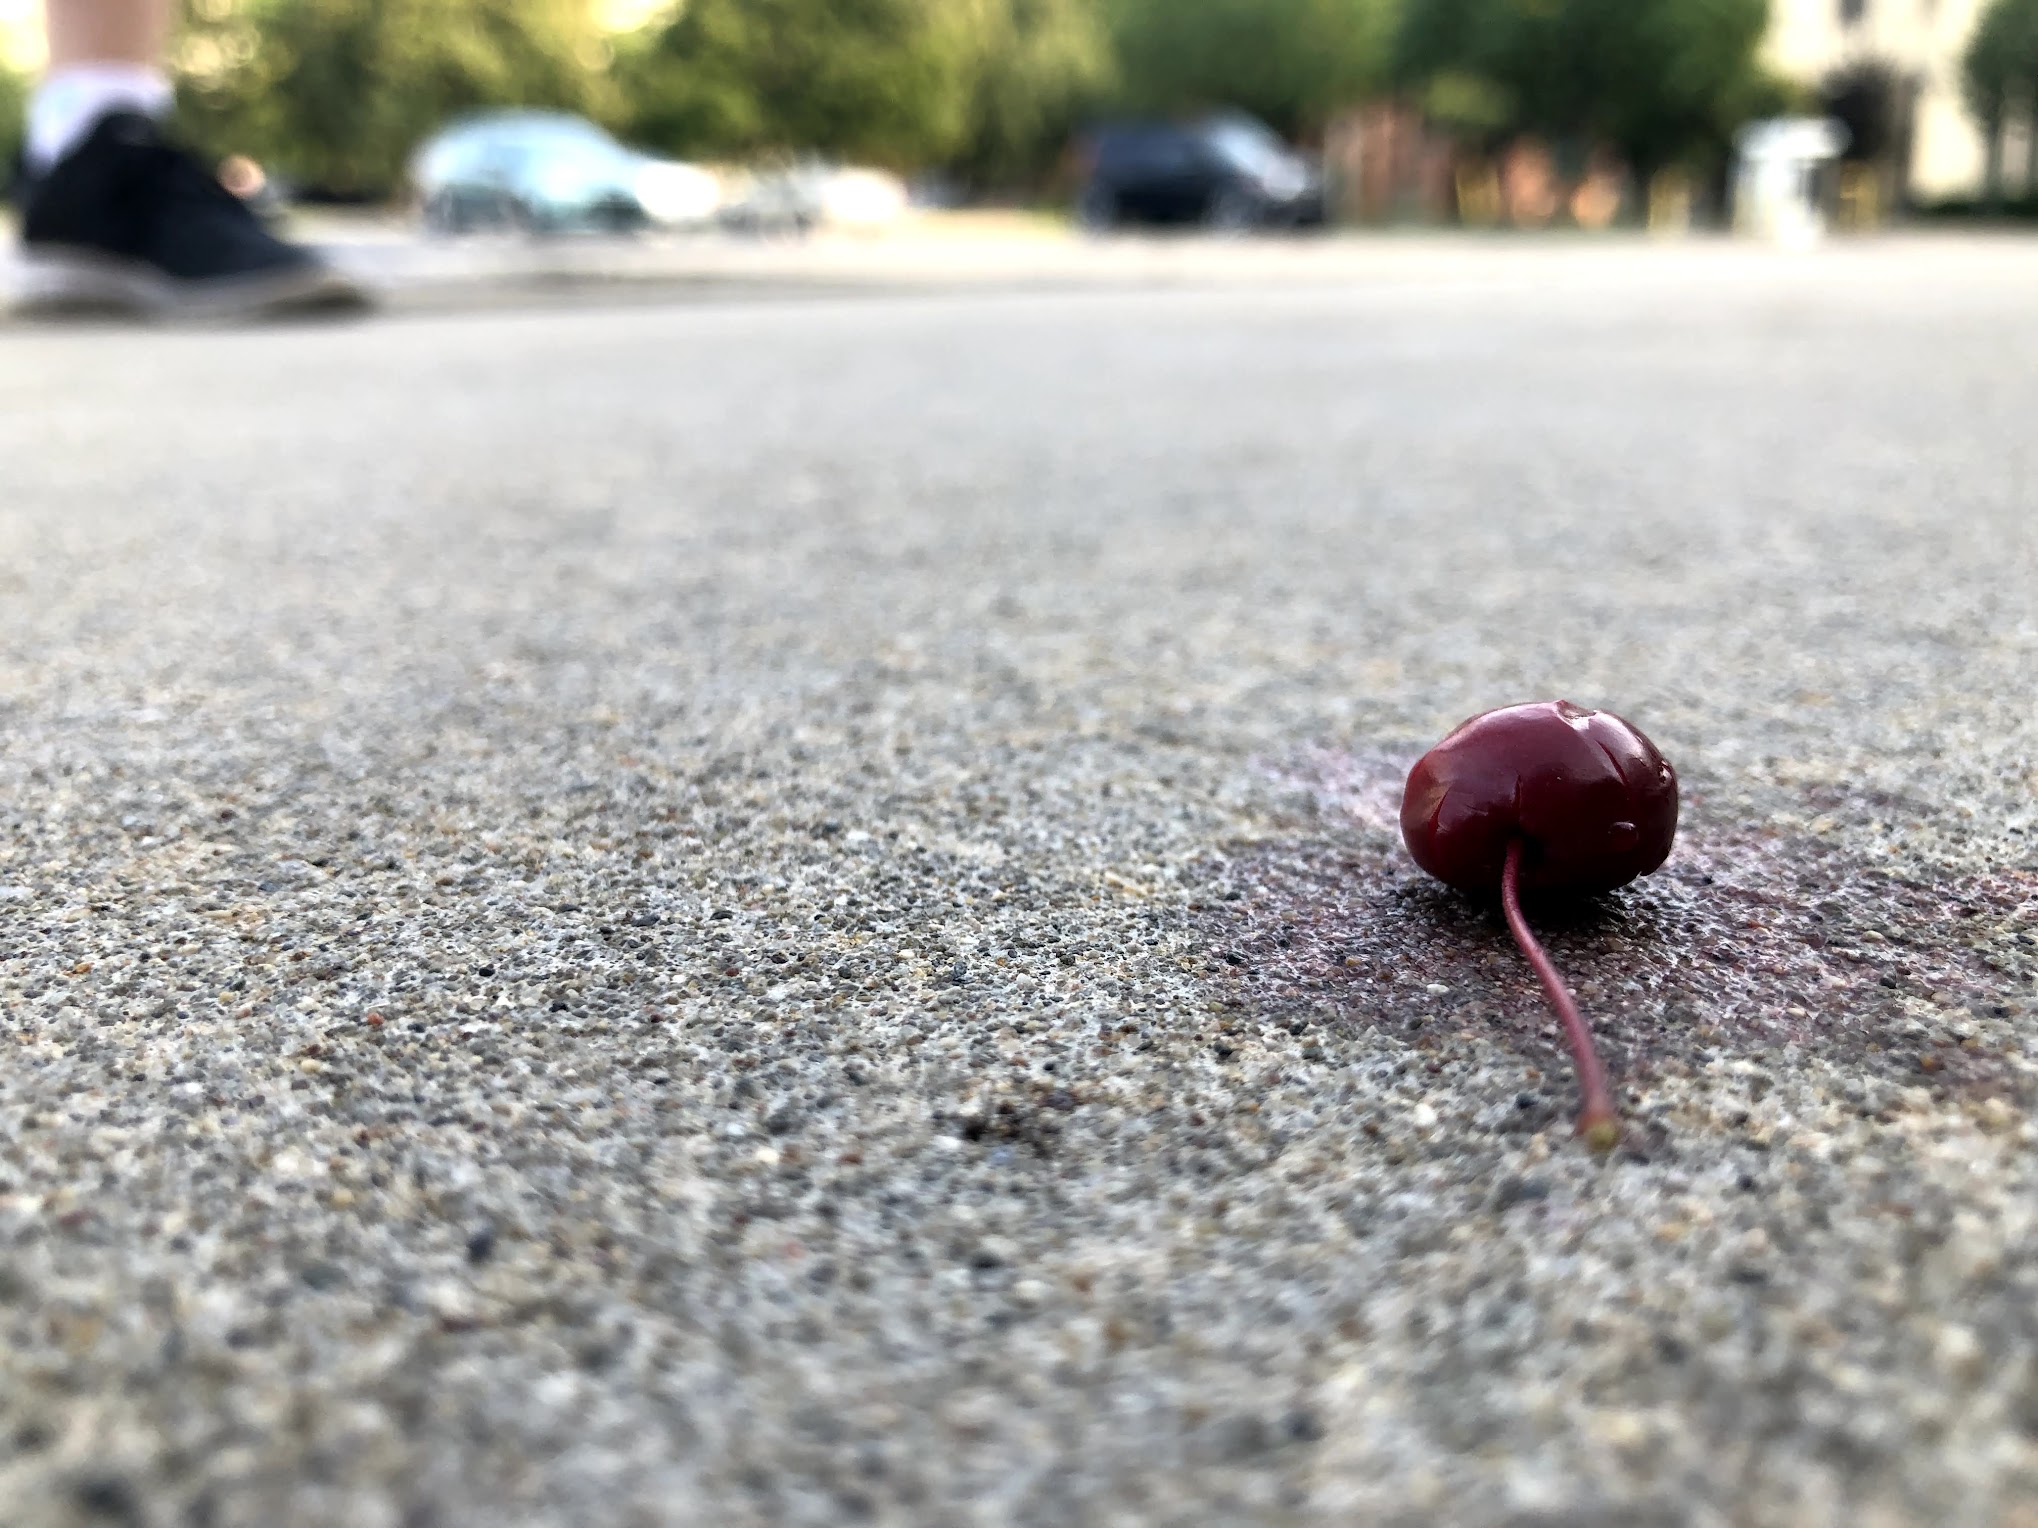 A single cherry smashed on the ground